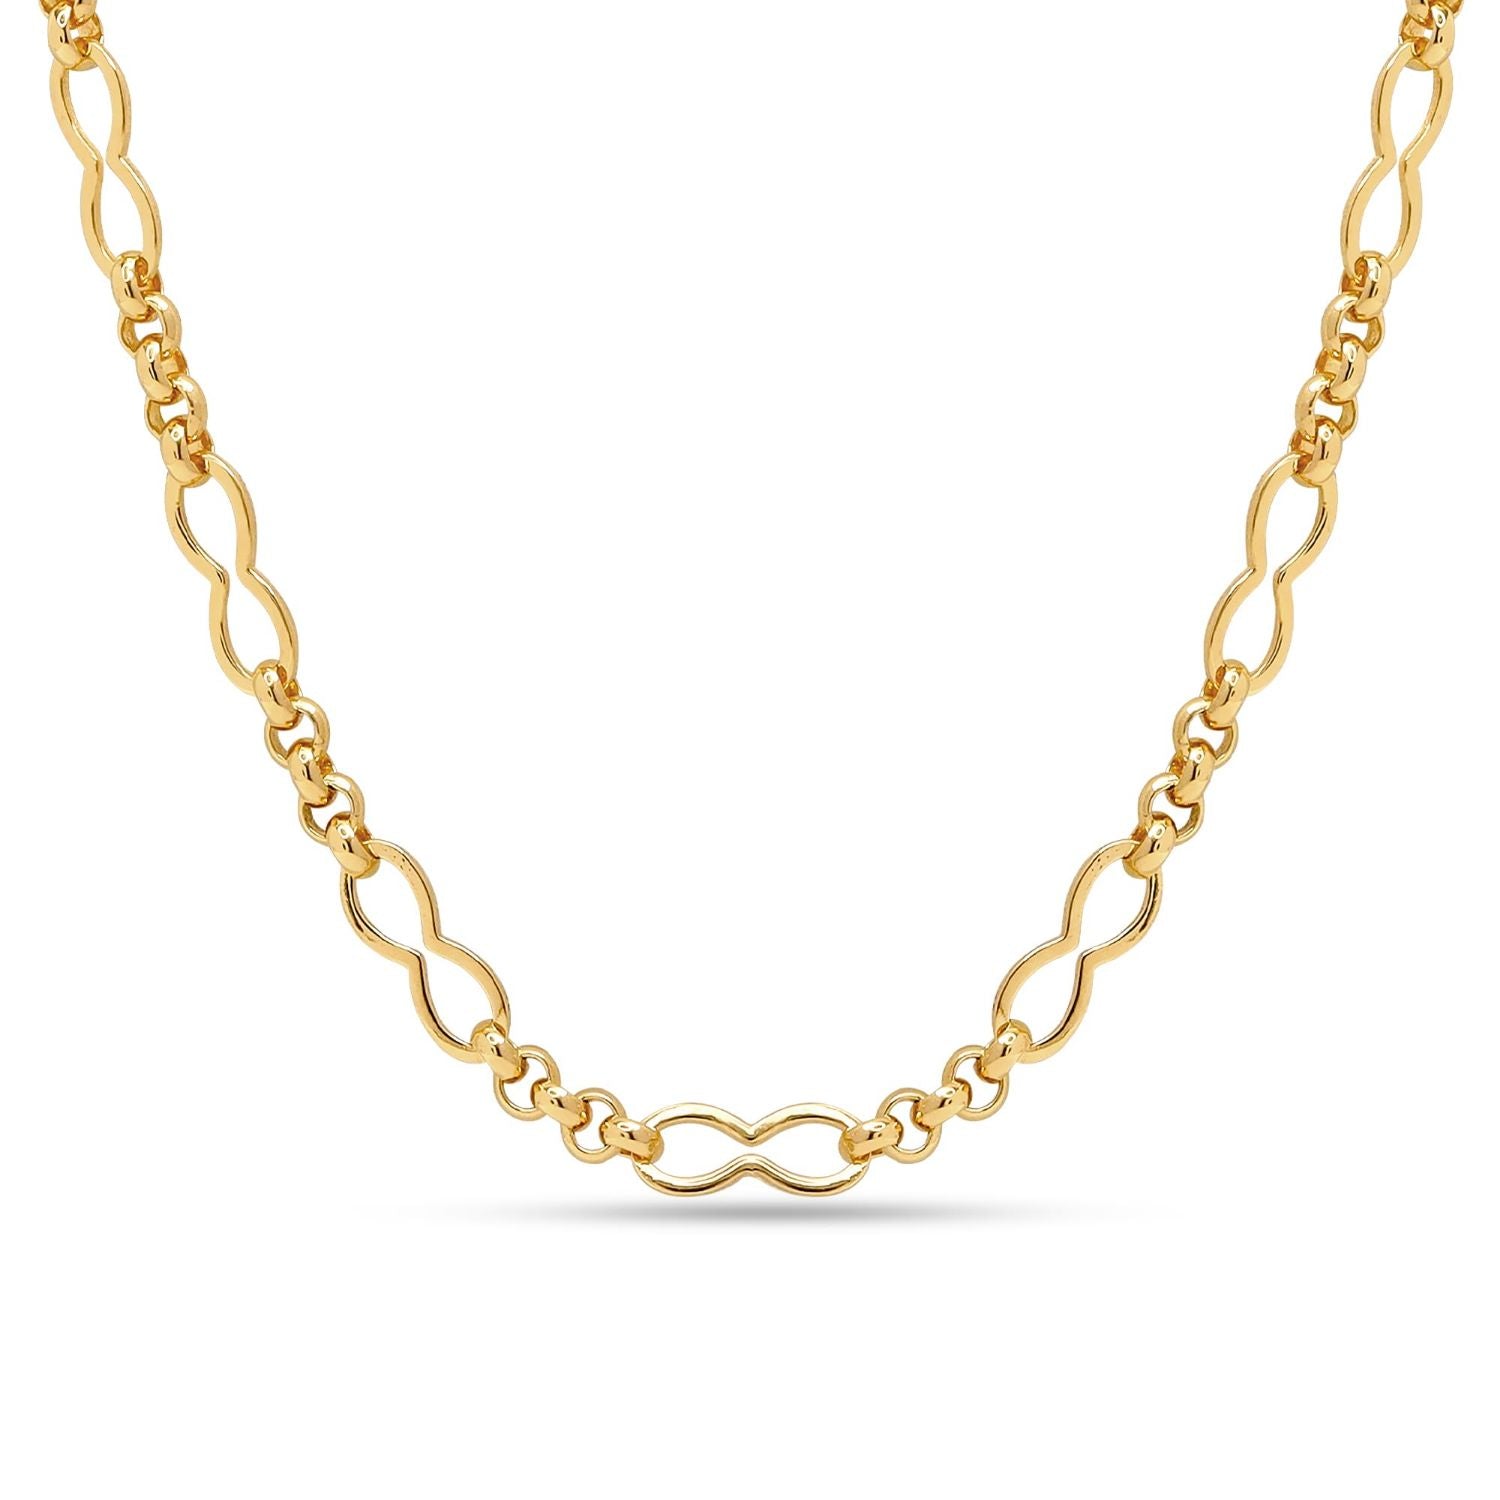 925 Sterling Silver 14K Gold Plated Rolo Link Chain Necklaces for Women Teen